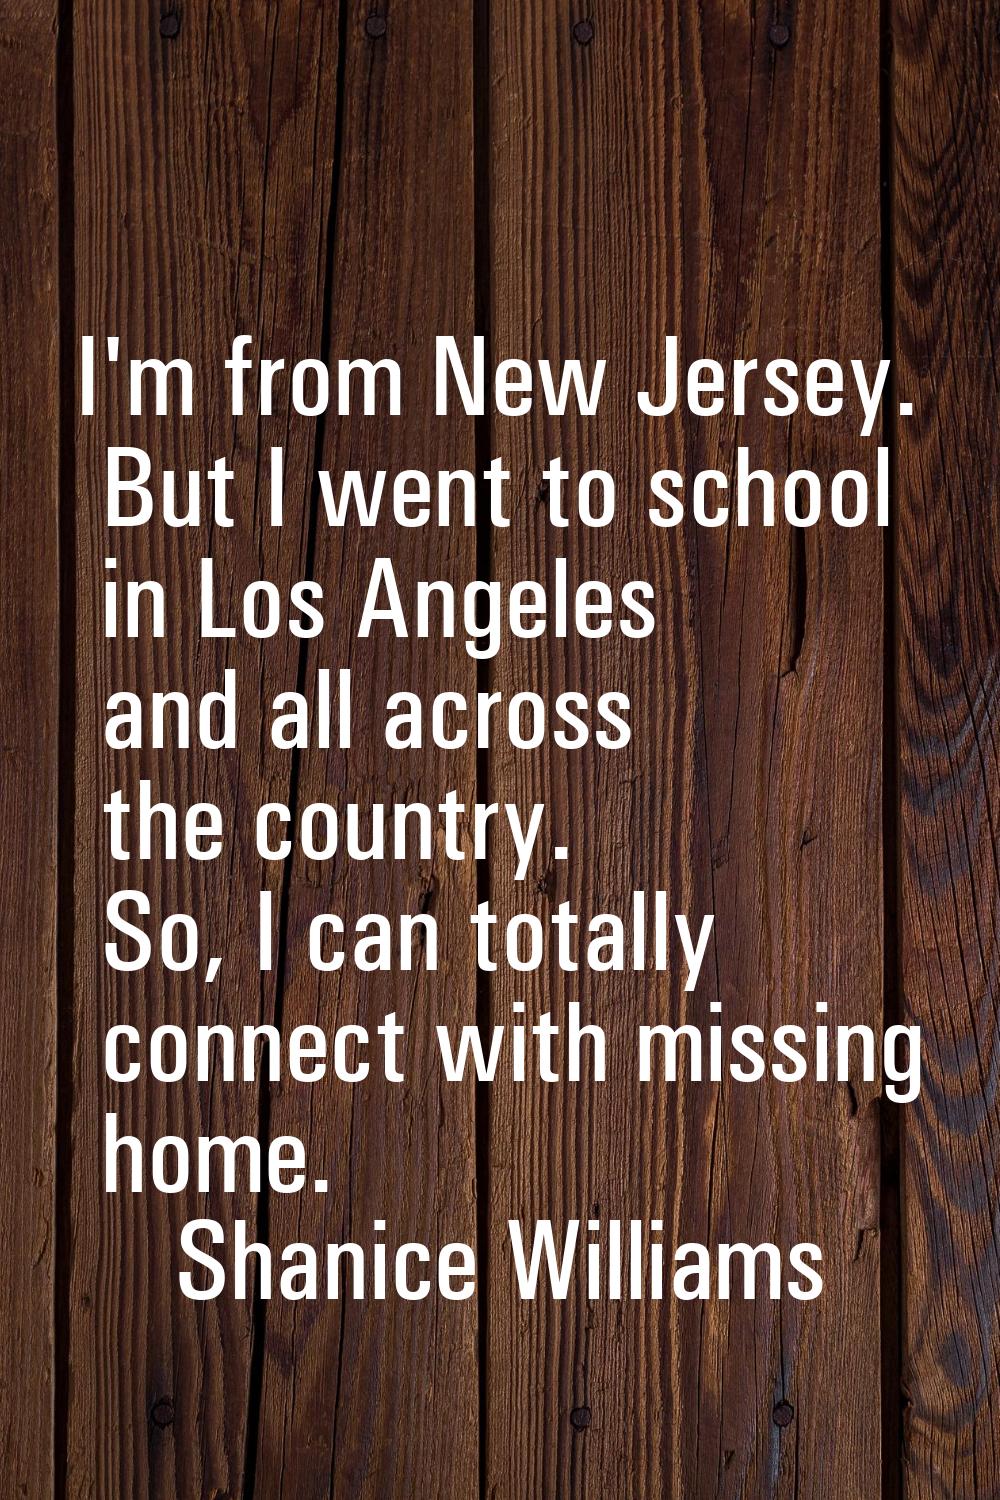 I'm from New Jersey. But I went to school in Los Angeles and all across the country. So, I can tota